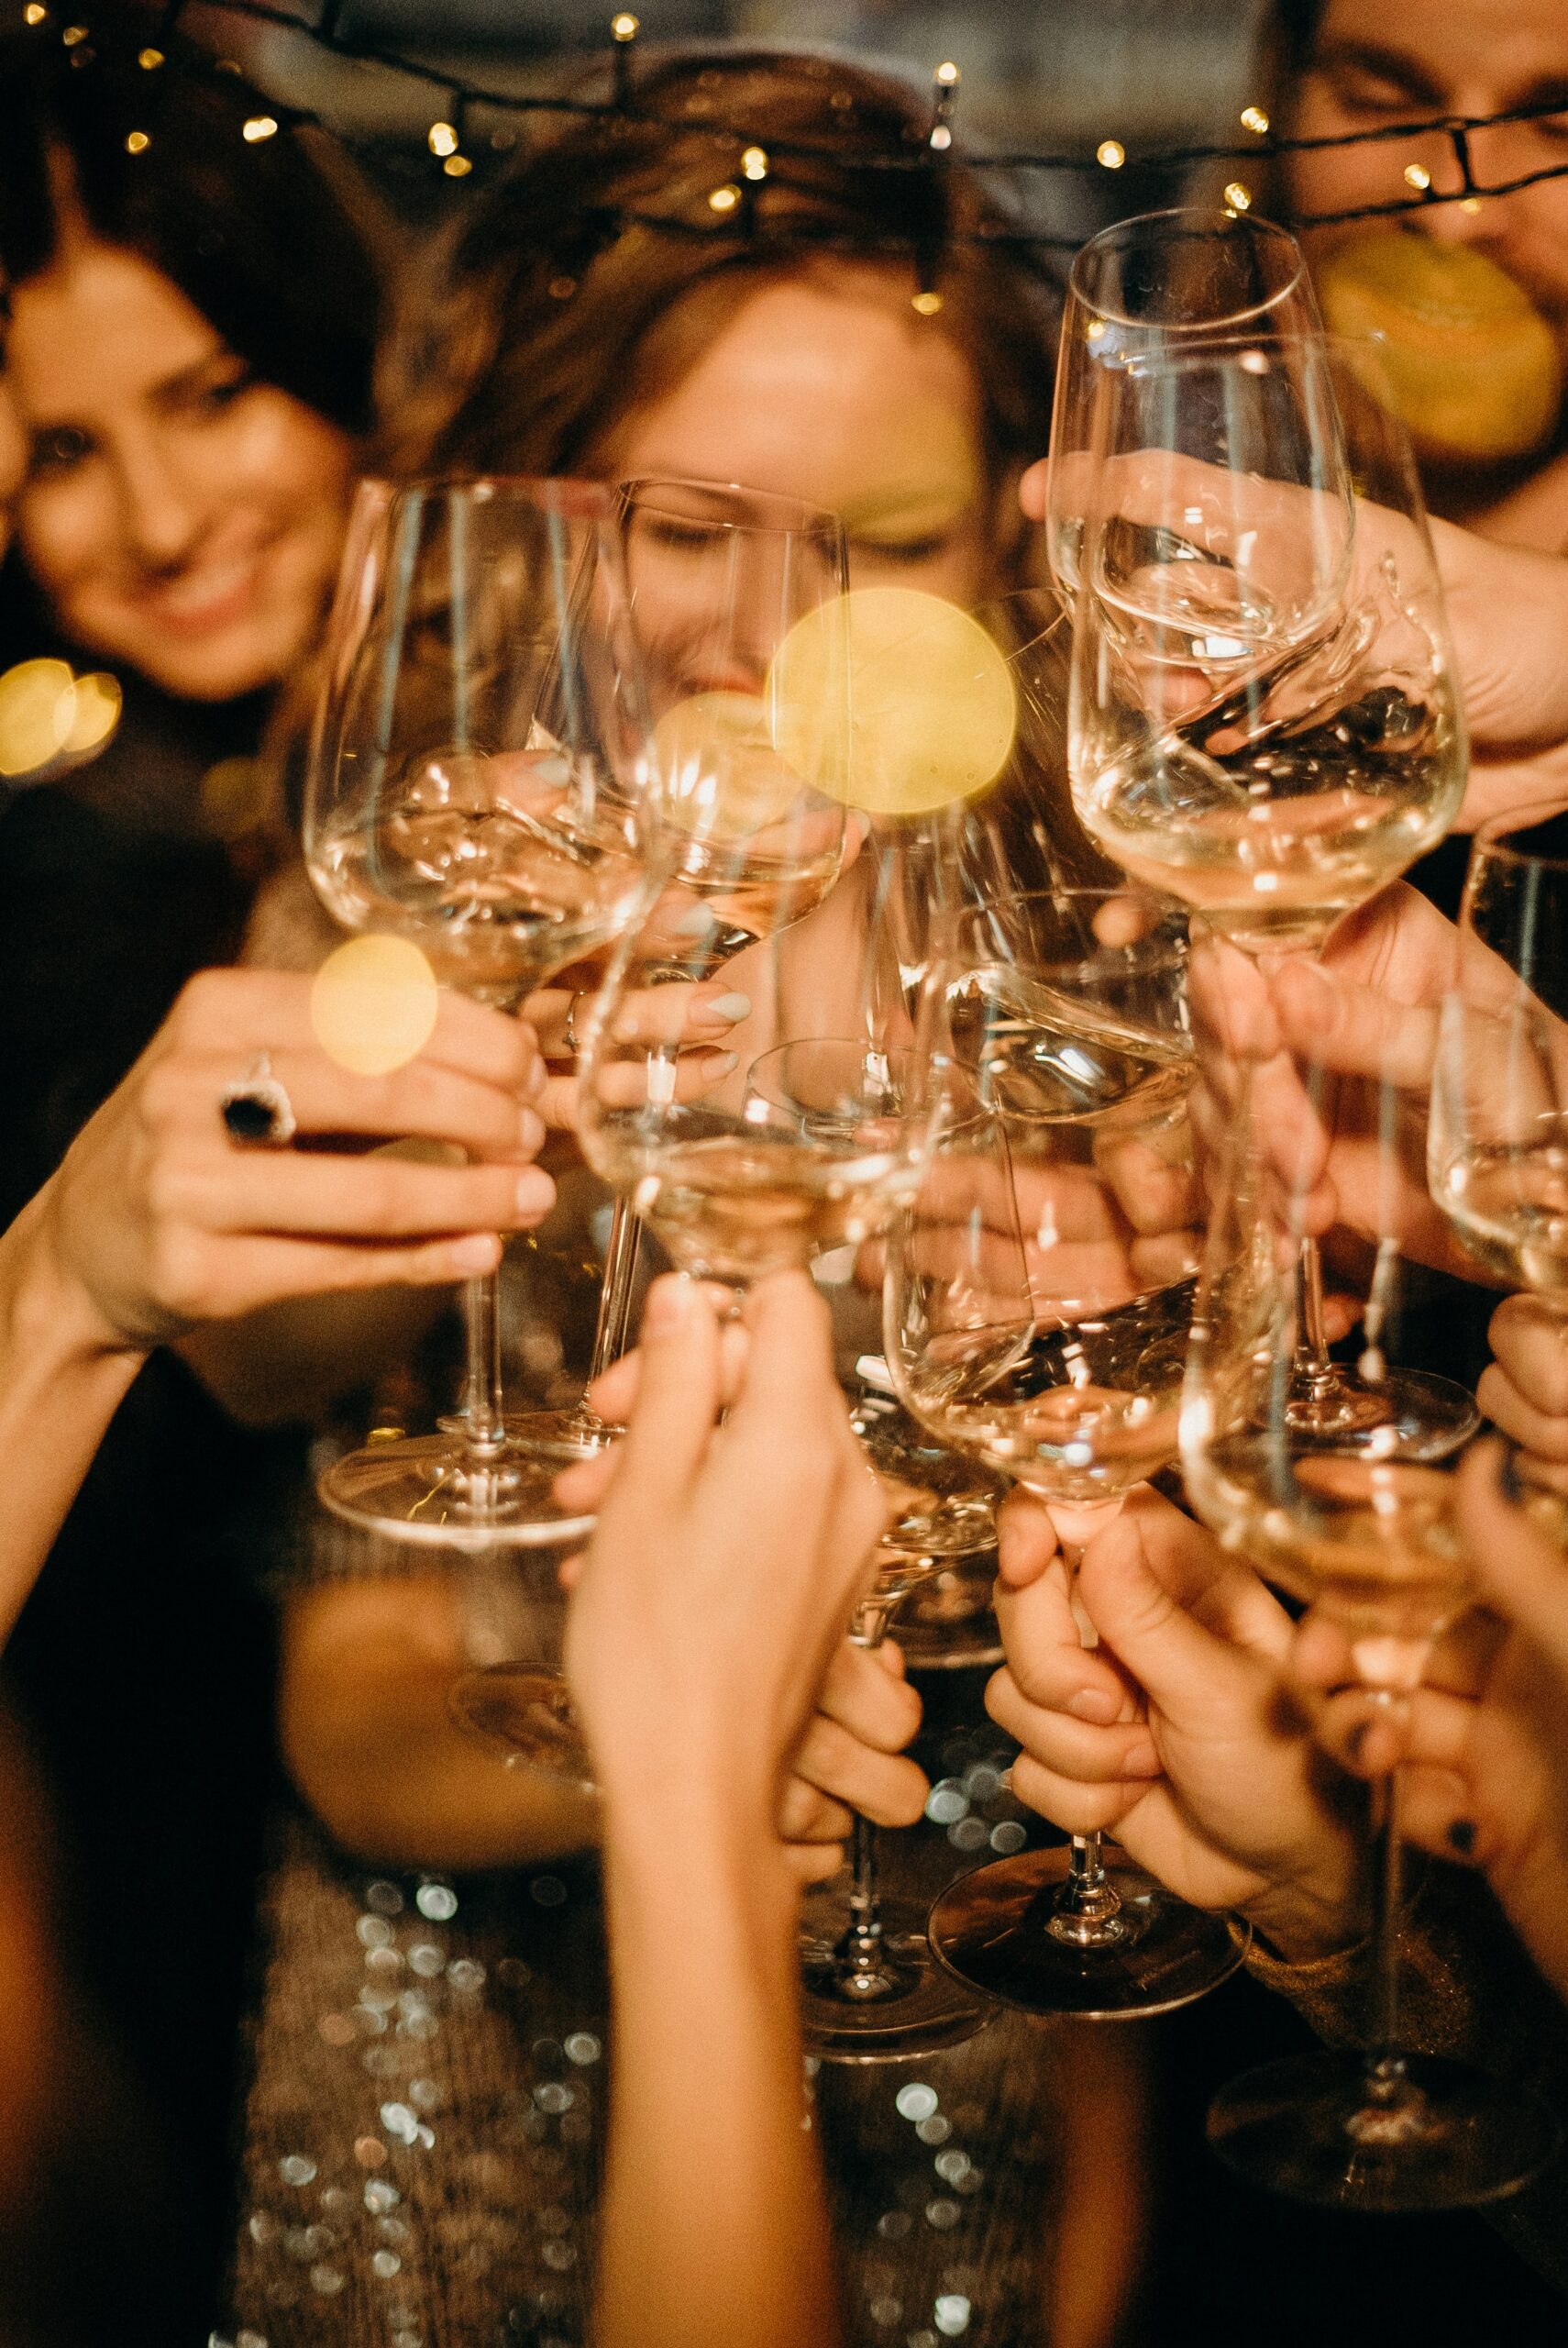 Toasting your team boosts morale and cultivates teambuilding.